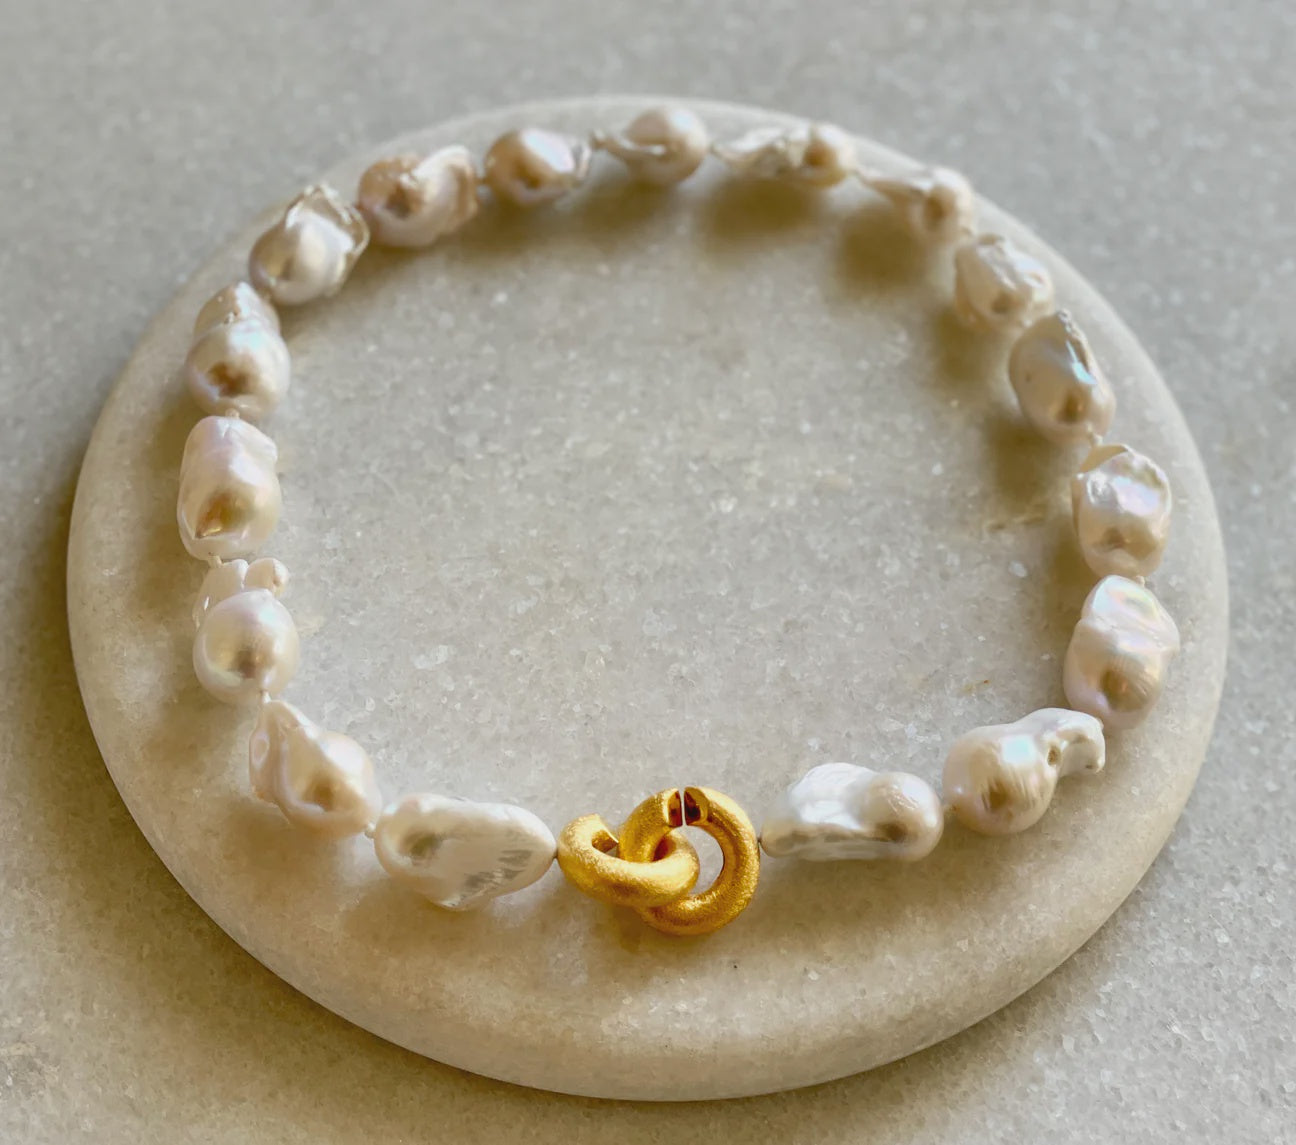 Bittersweet Designs Short Baroque Pearl Necklace with Gold Clasp displayed on a round, flat stone surface, featuring a unique gold clasp at the center in Arizona style.